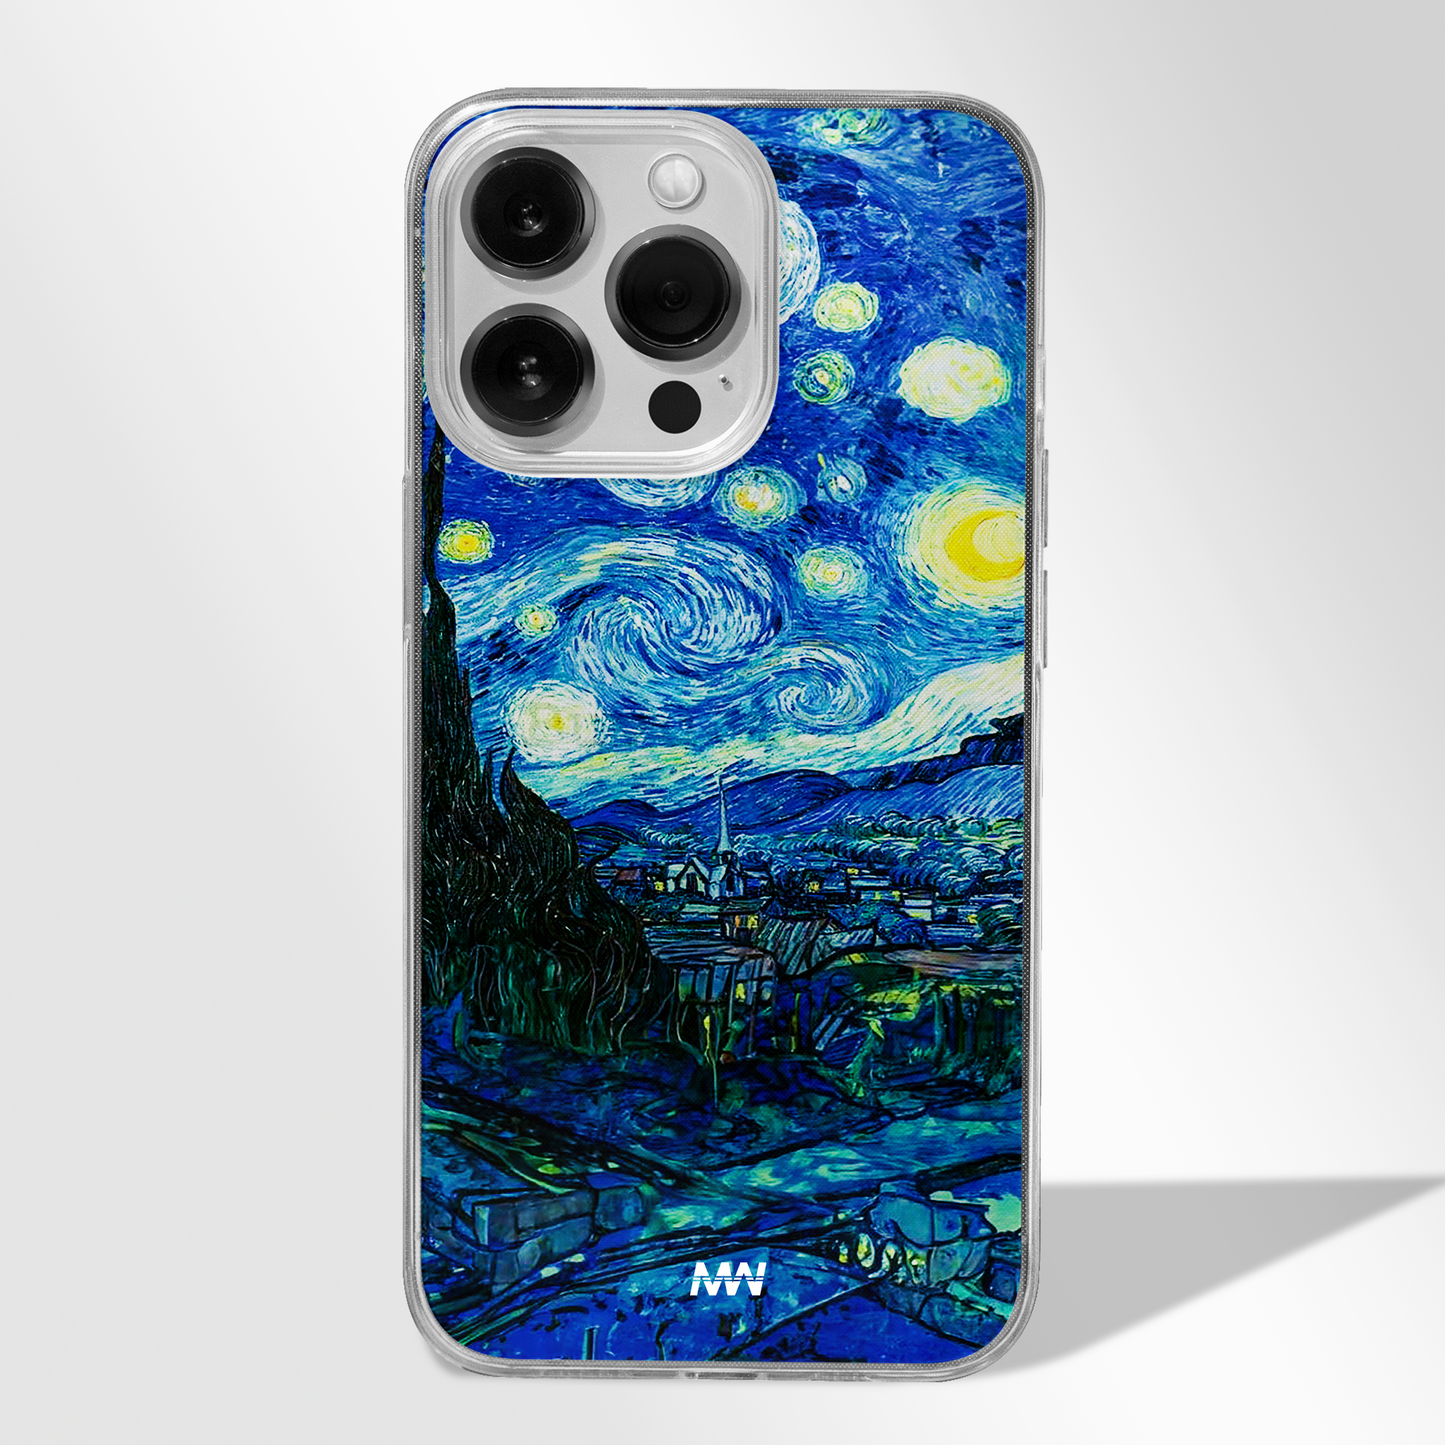 Starry Night Art Inspired CLEAR CASE